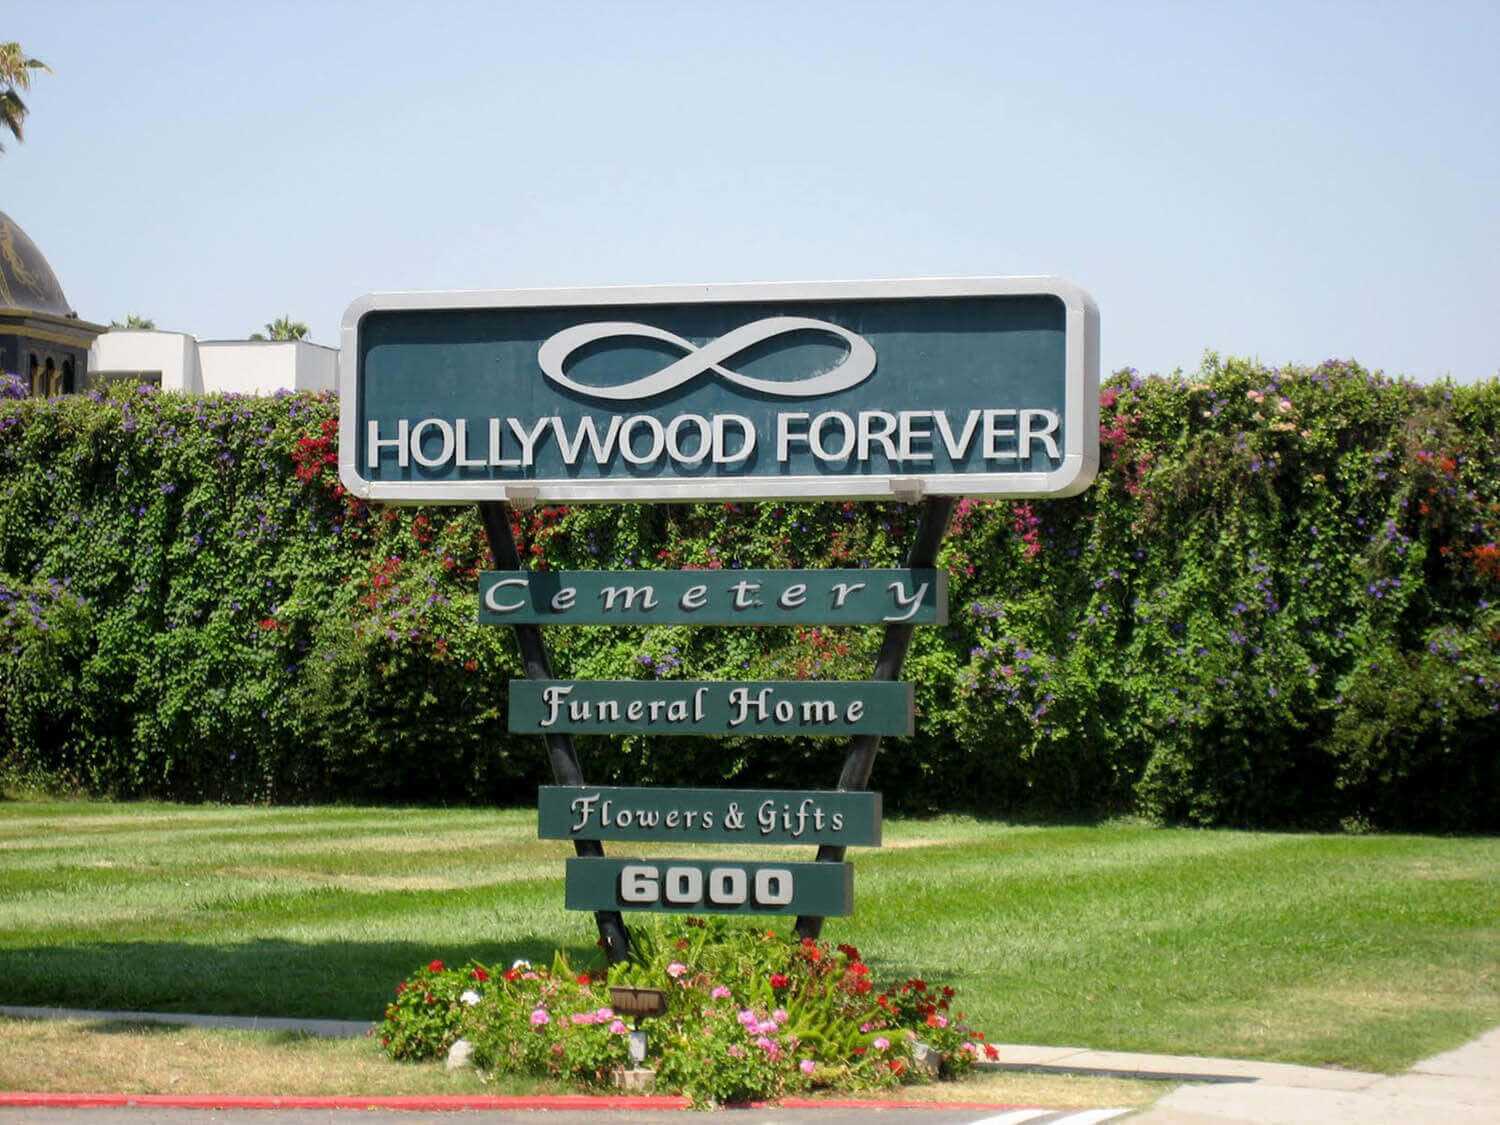 Hollywood cemetery tours: Grave Tours